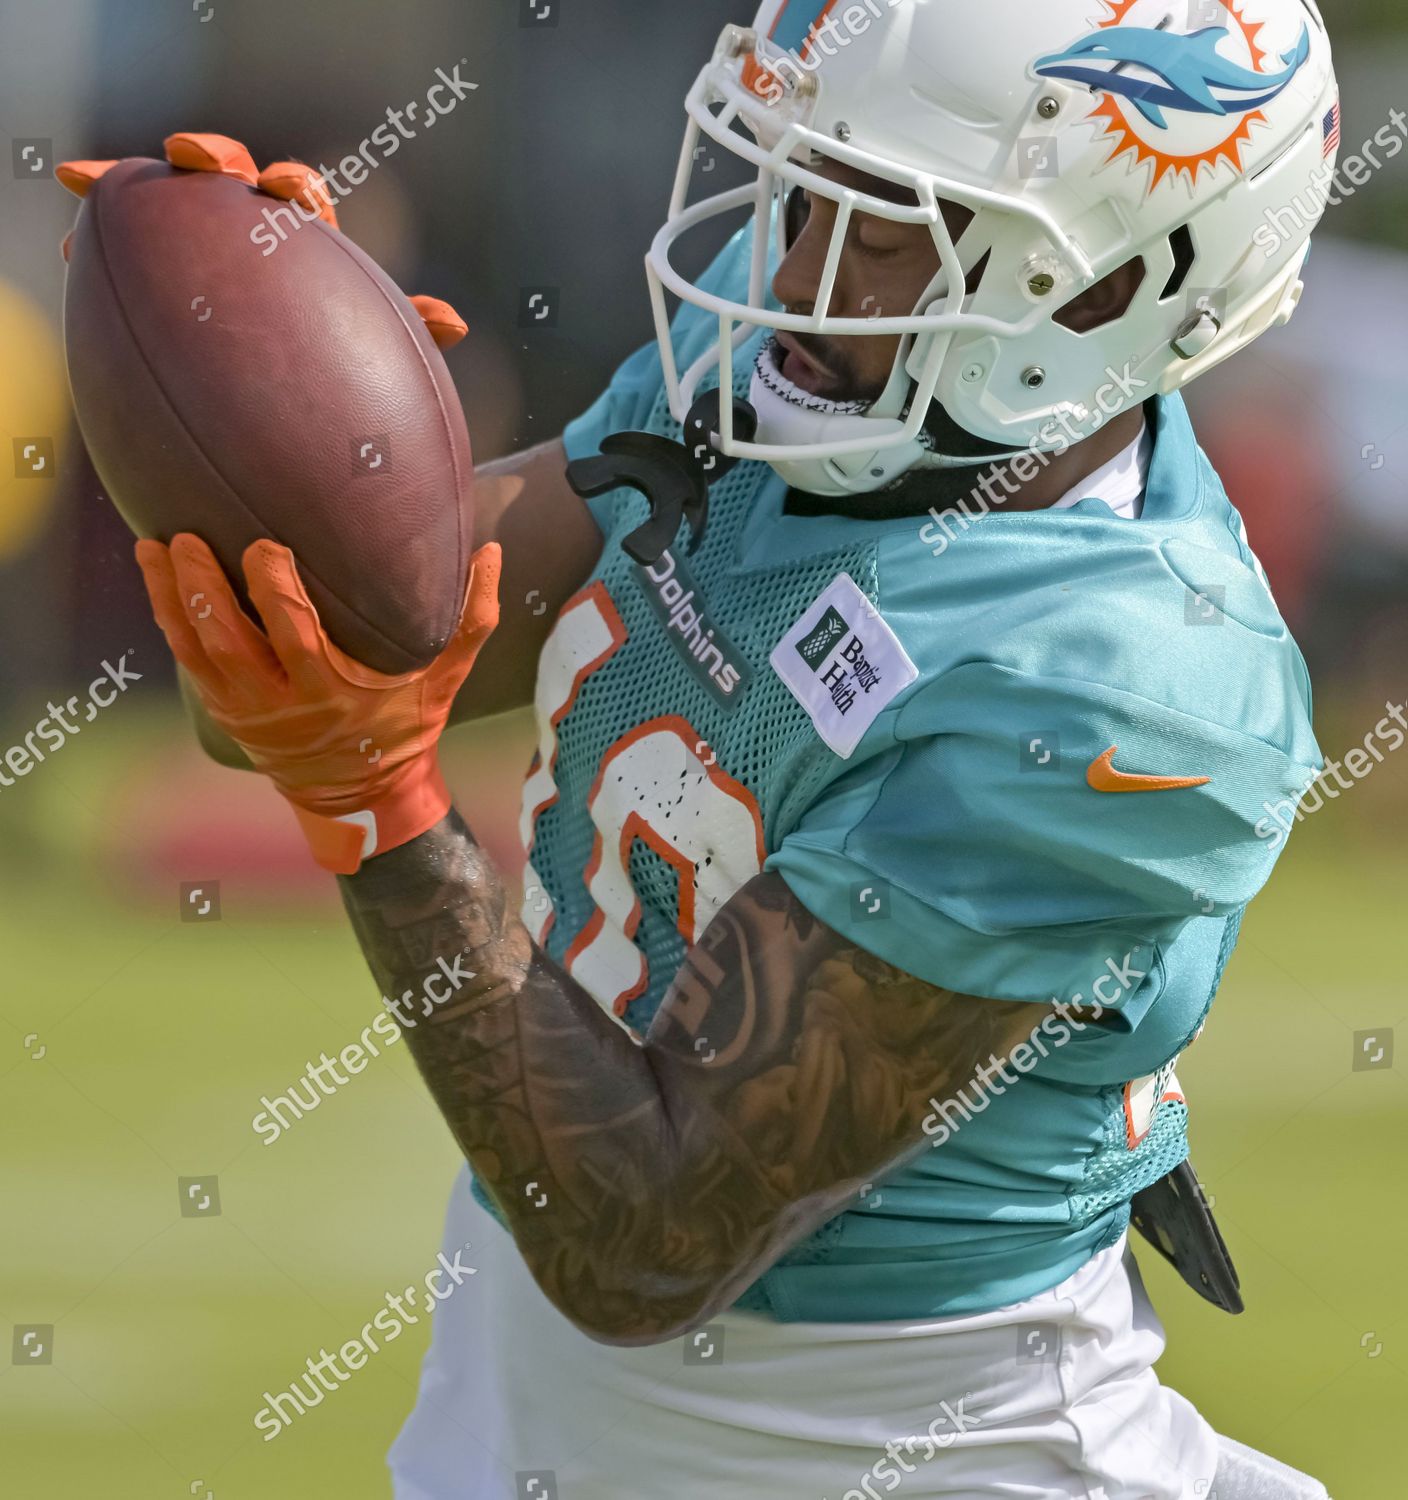 Photo Gallery: Dolphins - Buccaneers joint practice, Wednesday, August 10,  2022